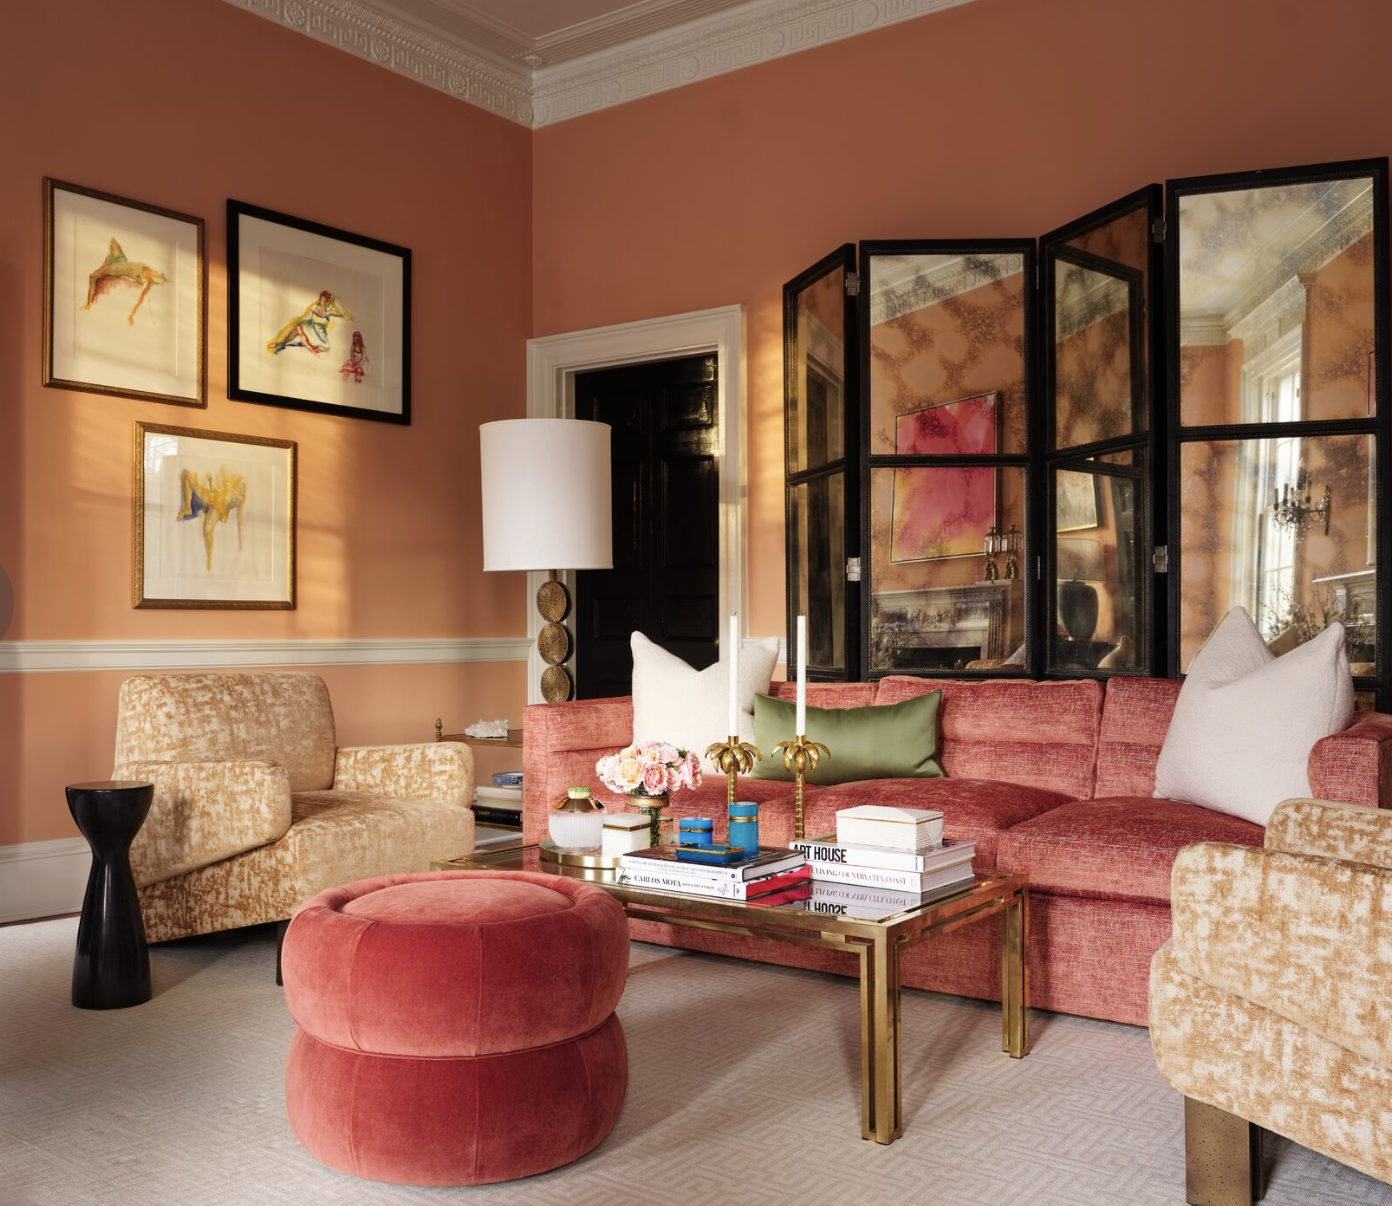 Living room color ideas – 15 beautiful color schemes to inspire a fresh new look